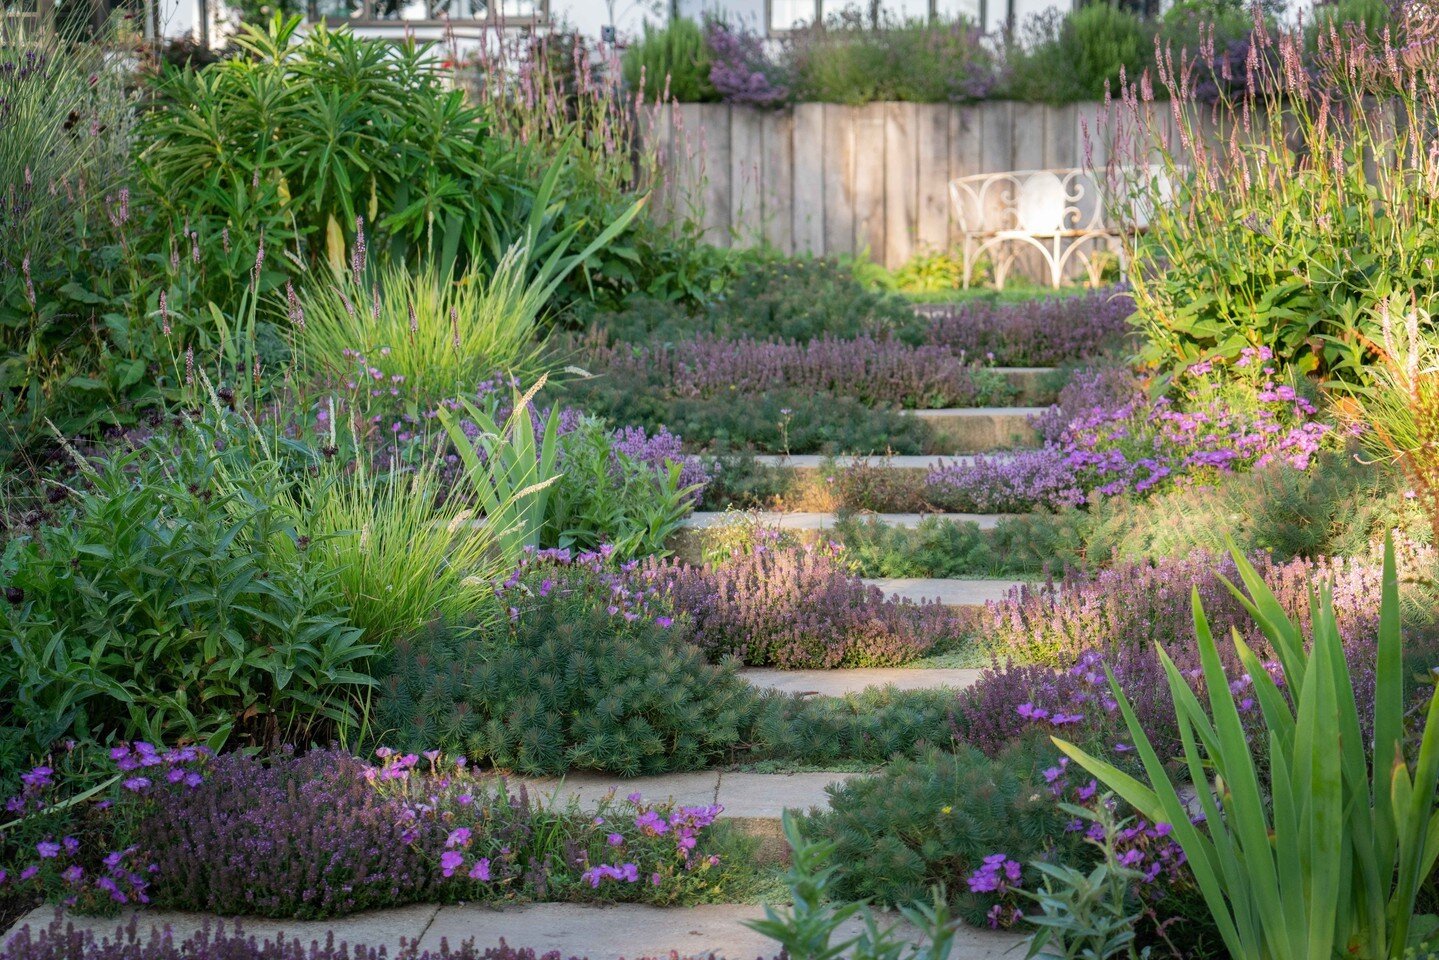 Summer steps embraced in soft and frothy tones of purple, pink and white. 
.
.
.
.
.
#summertime #summergarden #gardendesign #plantingdesign #gardens #fridayfeeling #plantingcolours #summerflowers